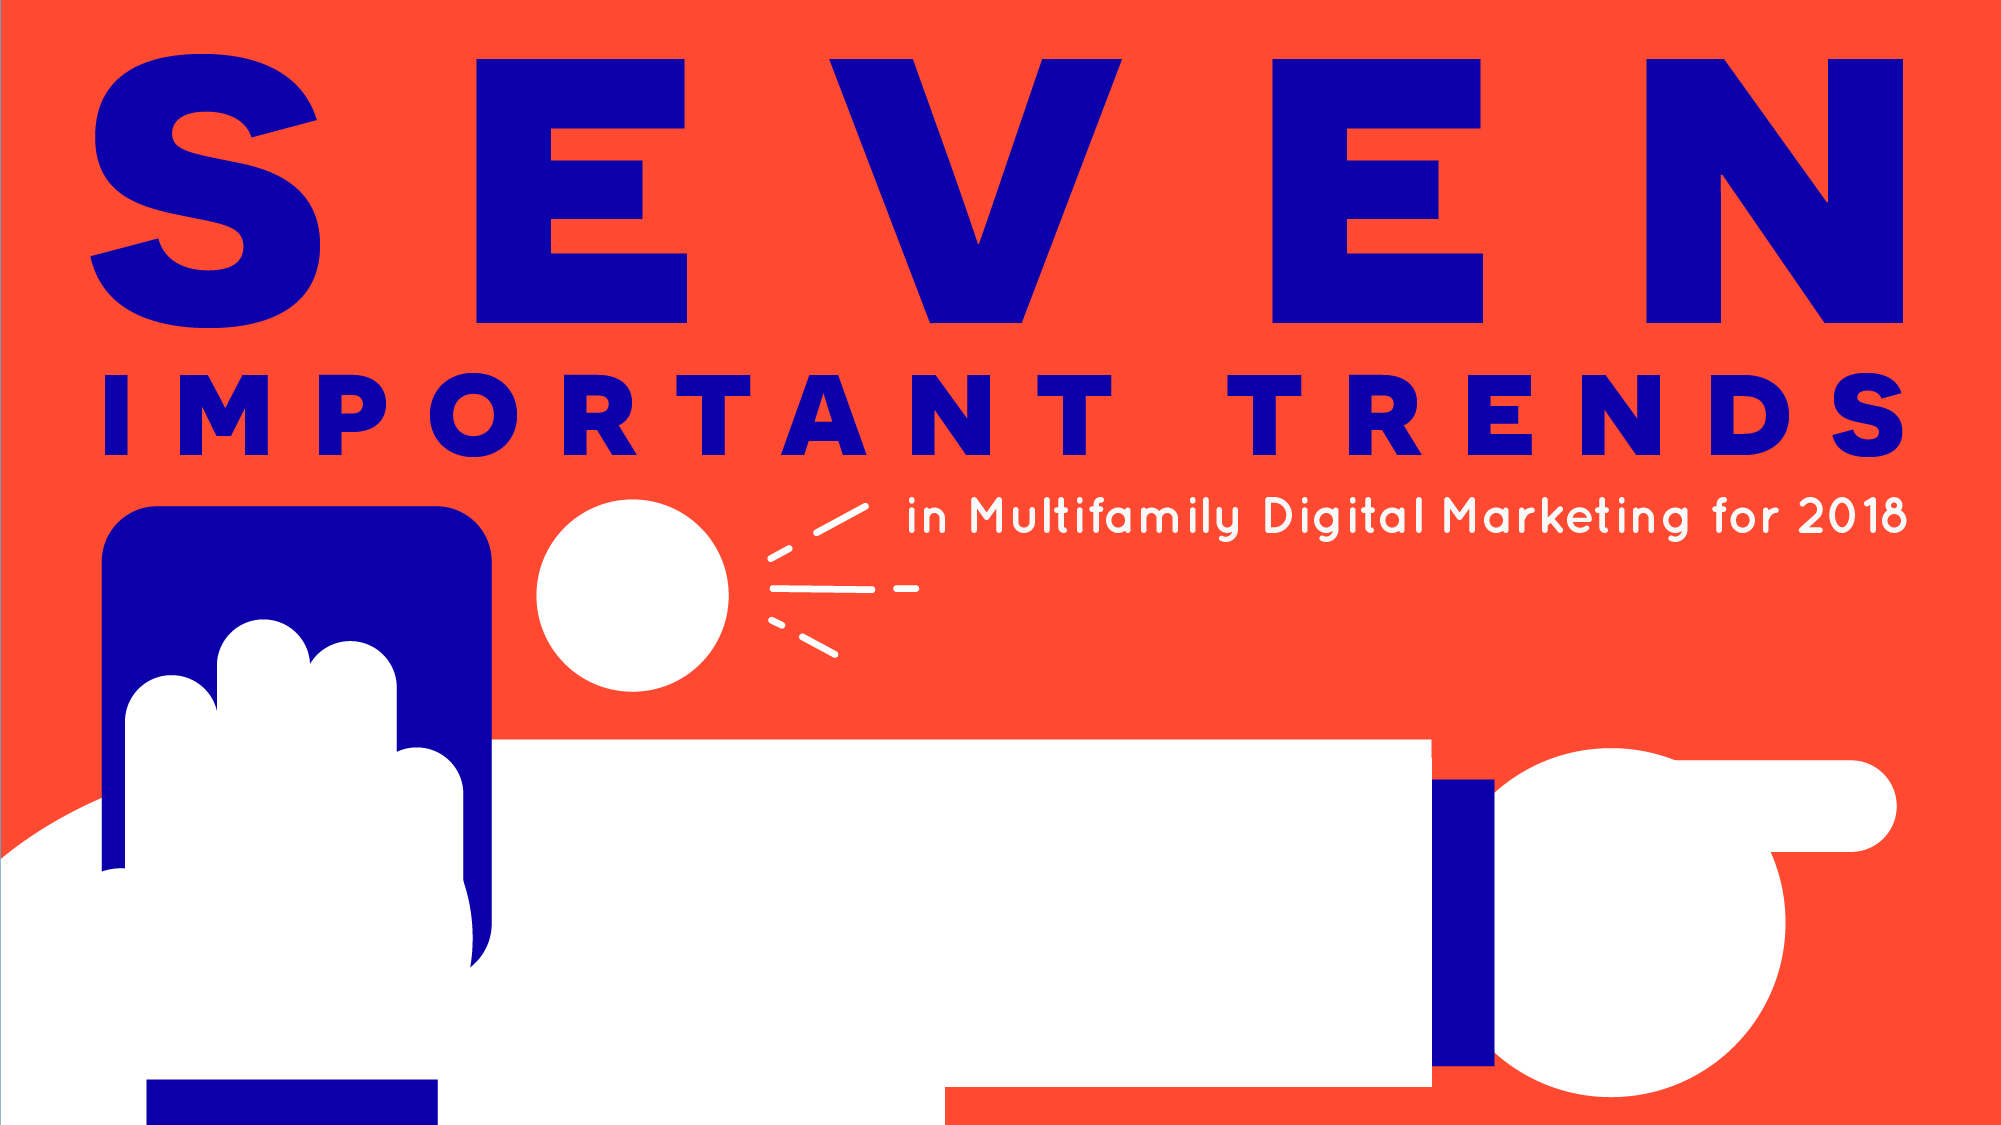 7 Important Trends in Multifamily Digital Marketing for 2018